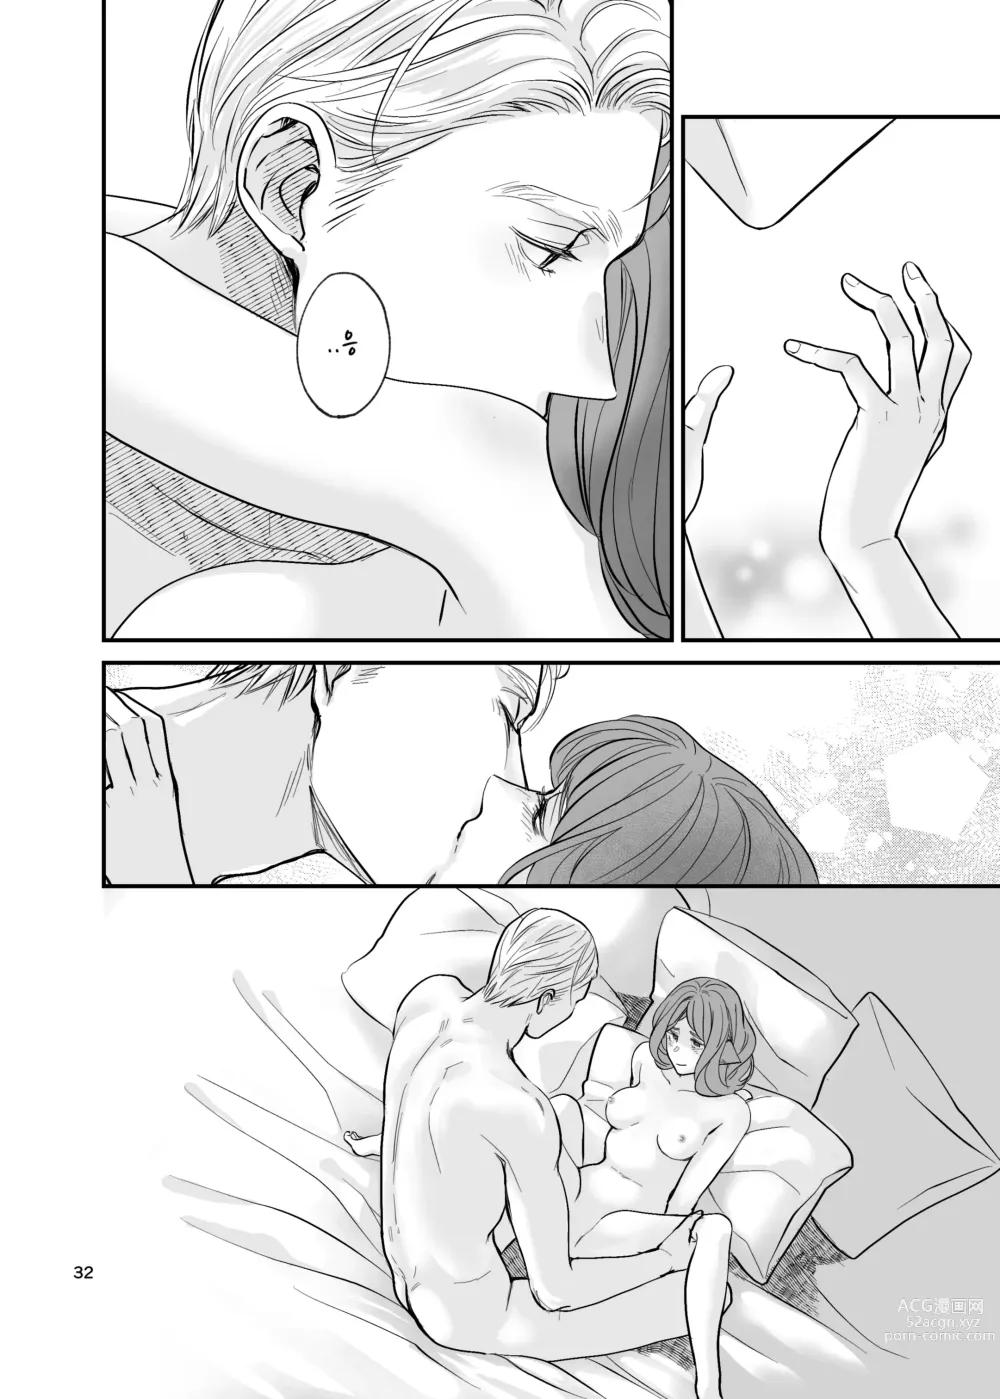 Page 32 of doujinshi 수인 영애와 혼약자